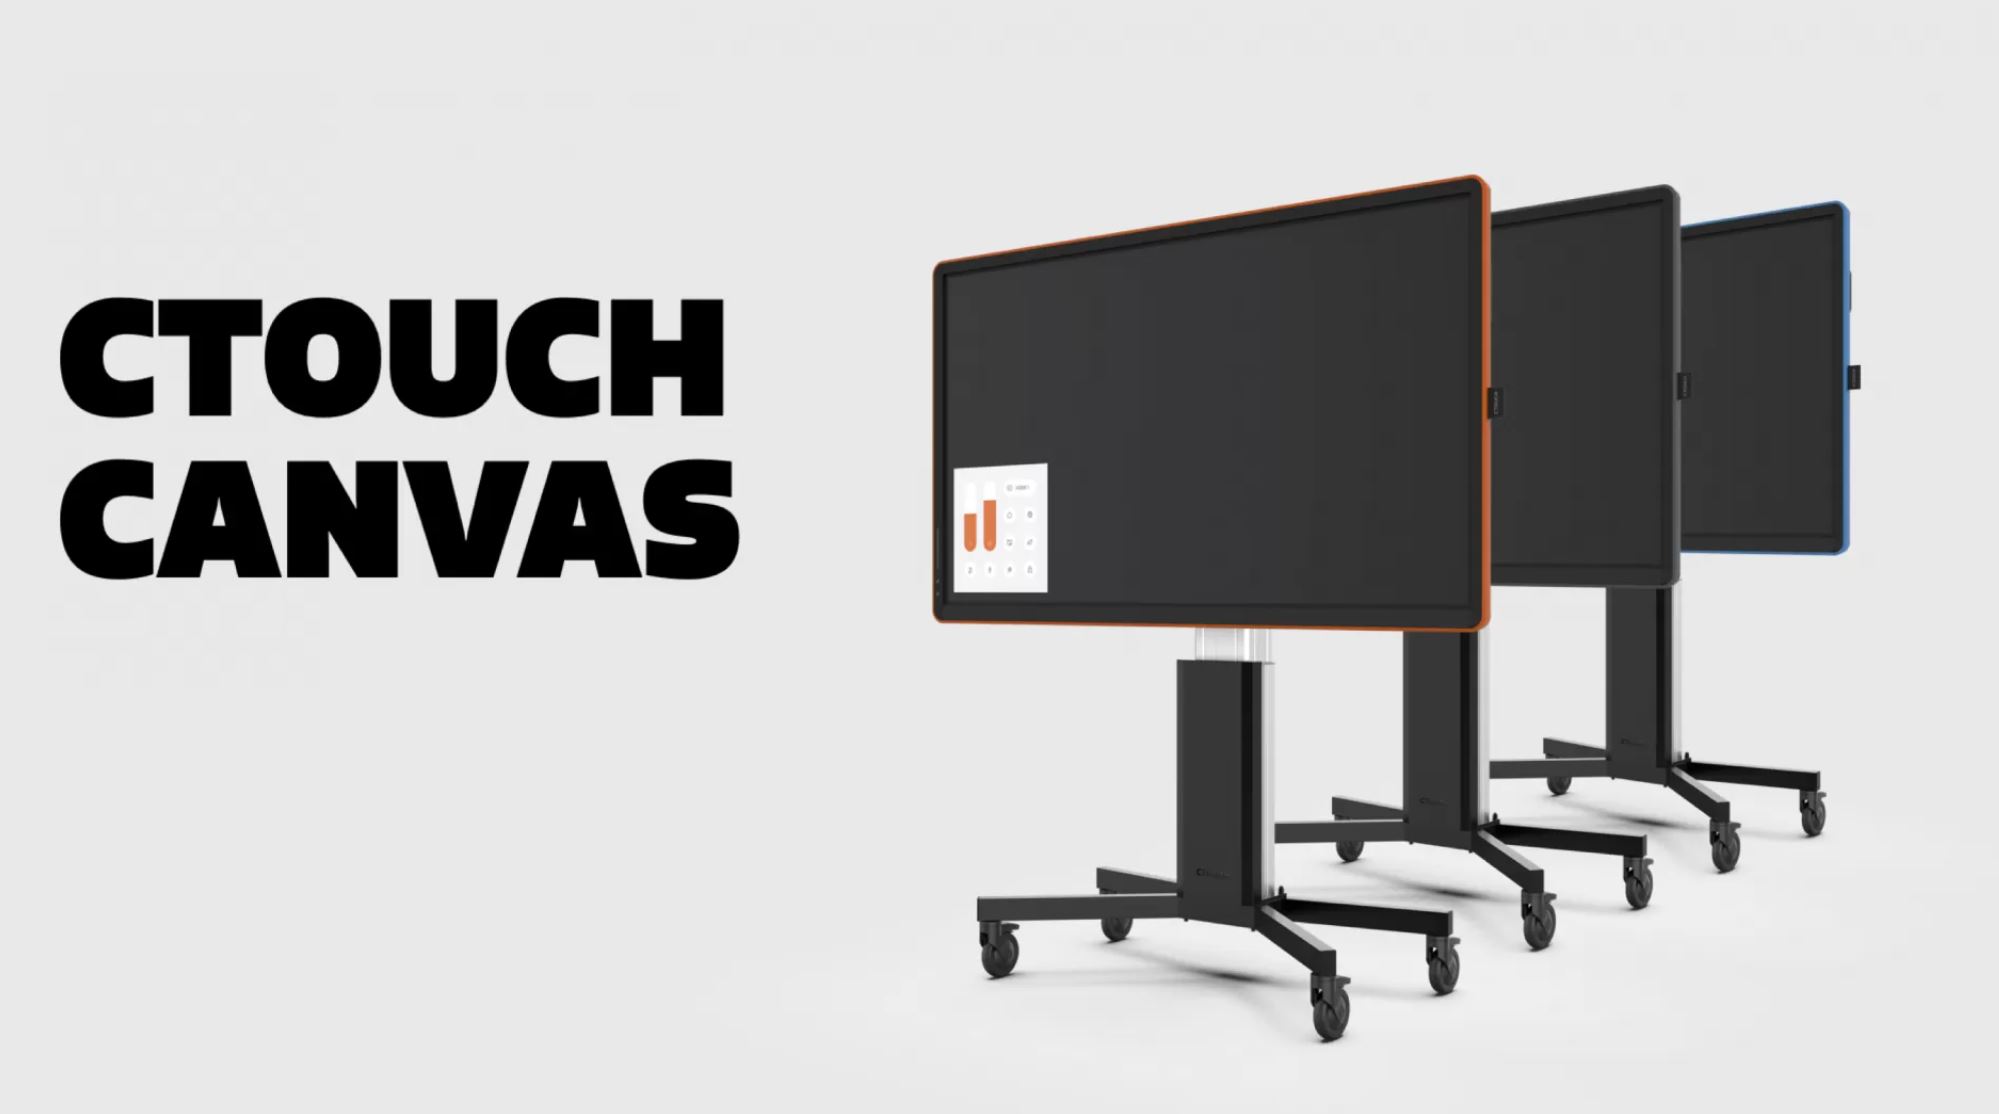 CTOUCH Canvas 55 - Shelf Orange - 55 inch - 350 cd/m² - Ultra HD - 4K - 3840x2160 - NO-OS operating system - 20 point - Touch Display